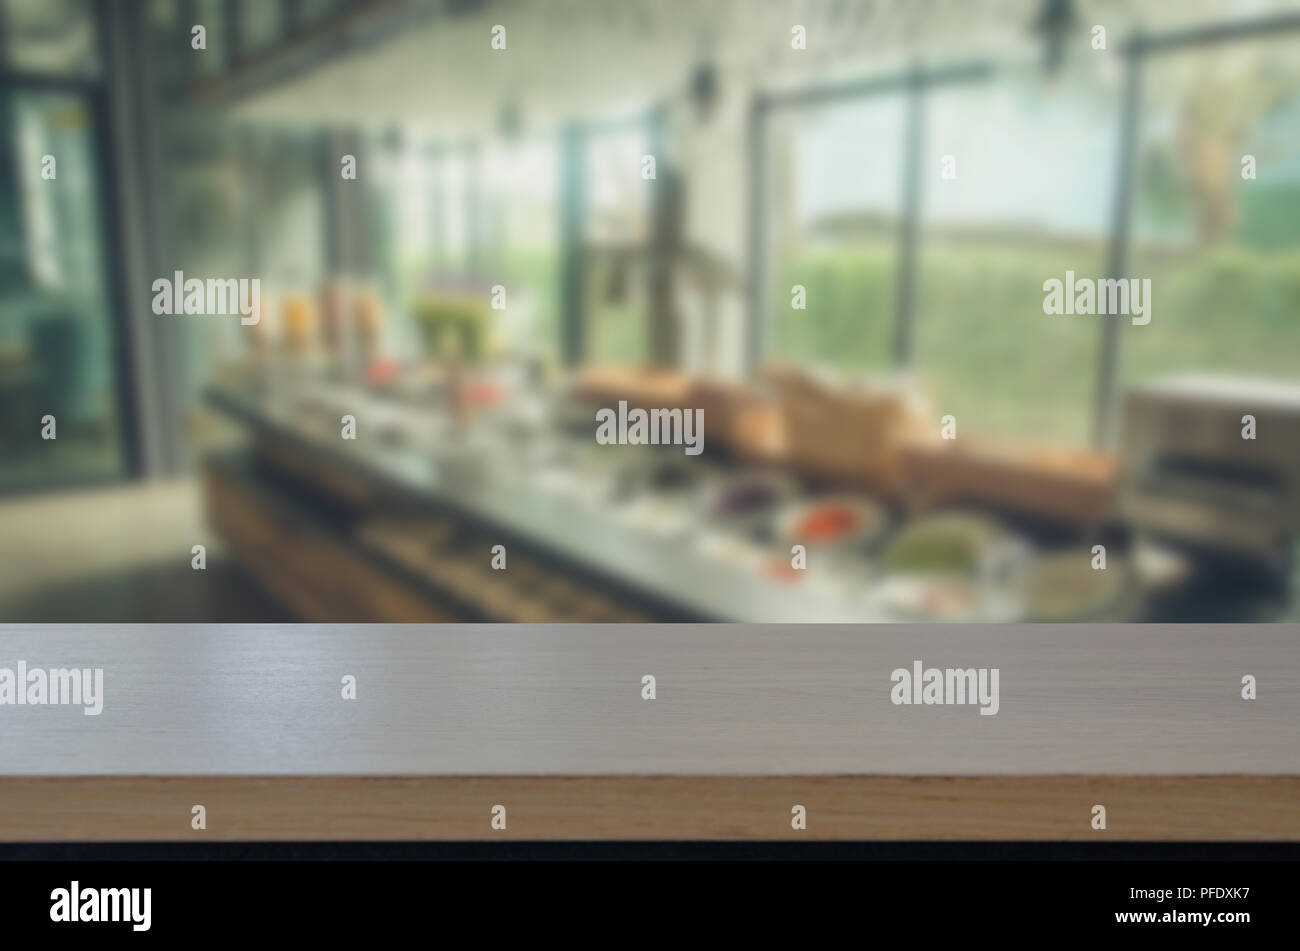 wood top table and Abstract Blurred image food bar at cafe. Can be used for display or montage your products. Stock Photo